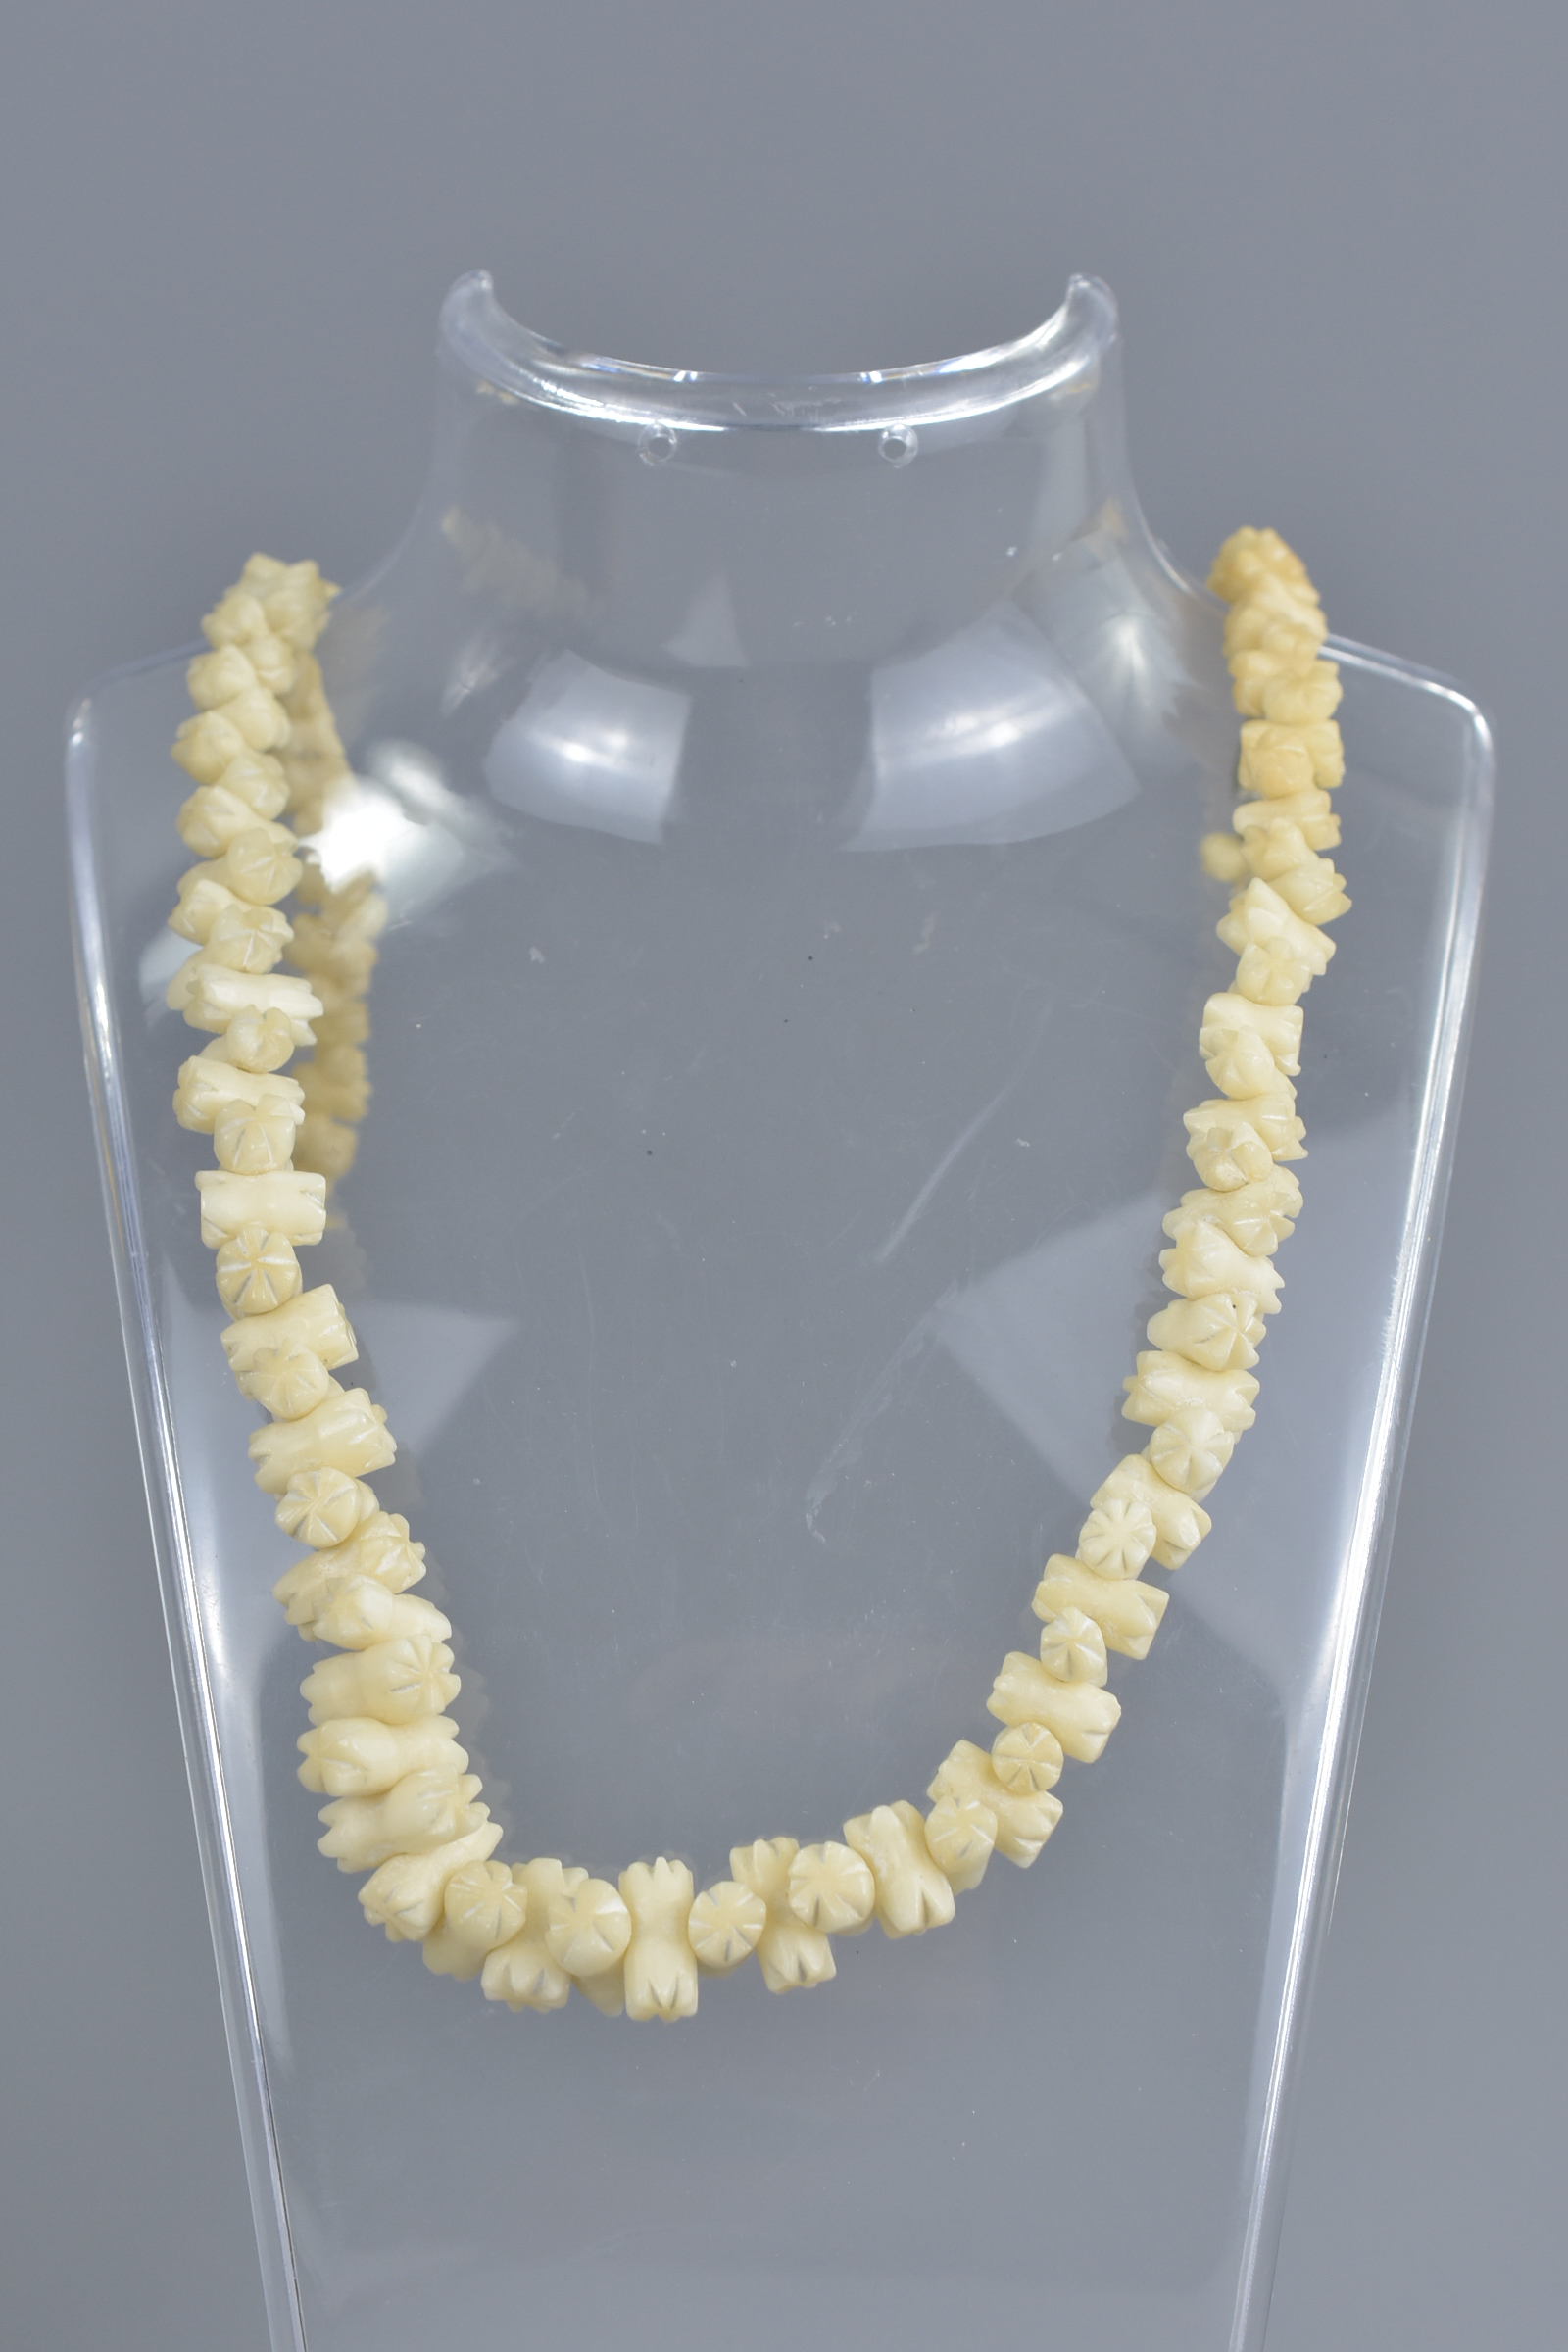 Three Strand Coral Bead Necklace - Image 3 of 7